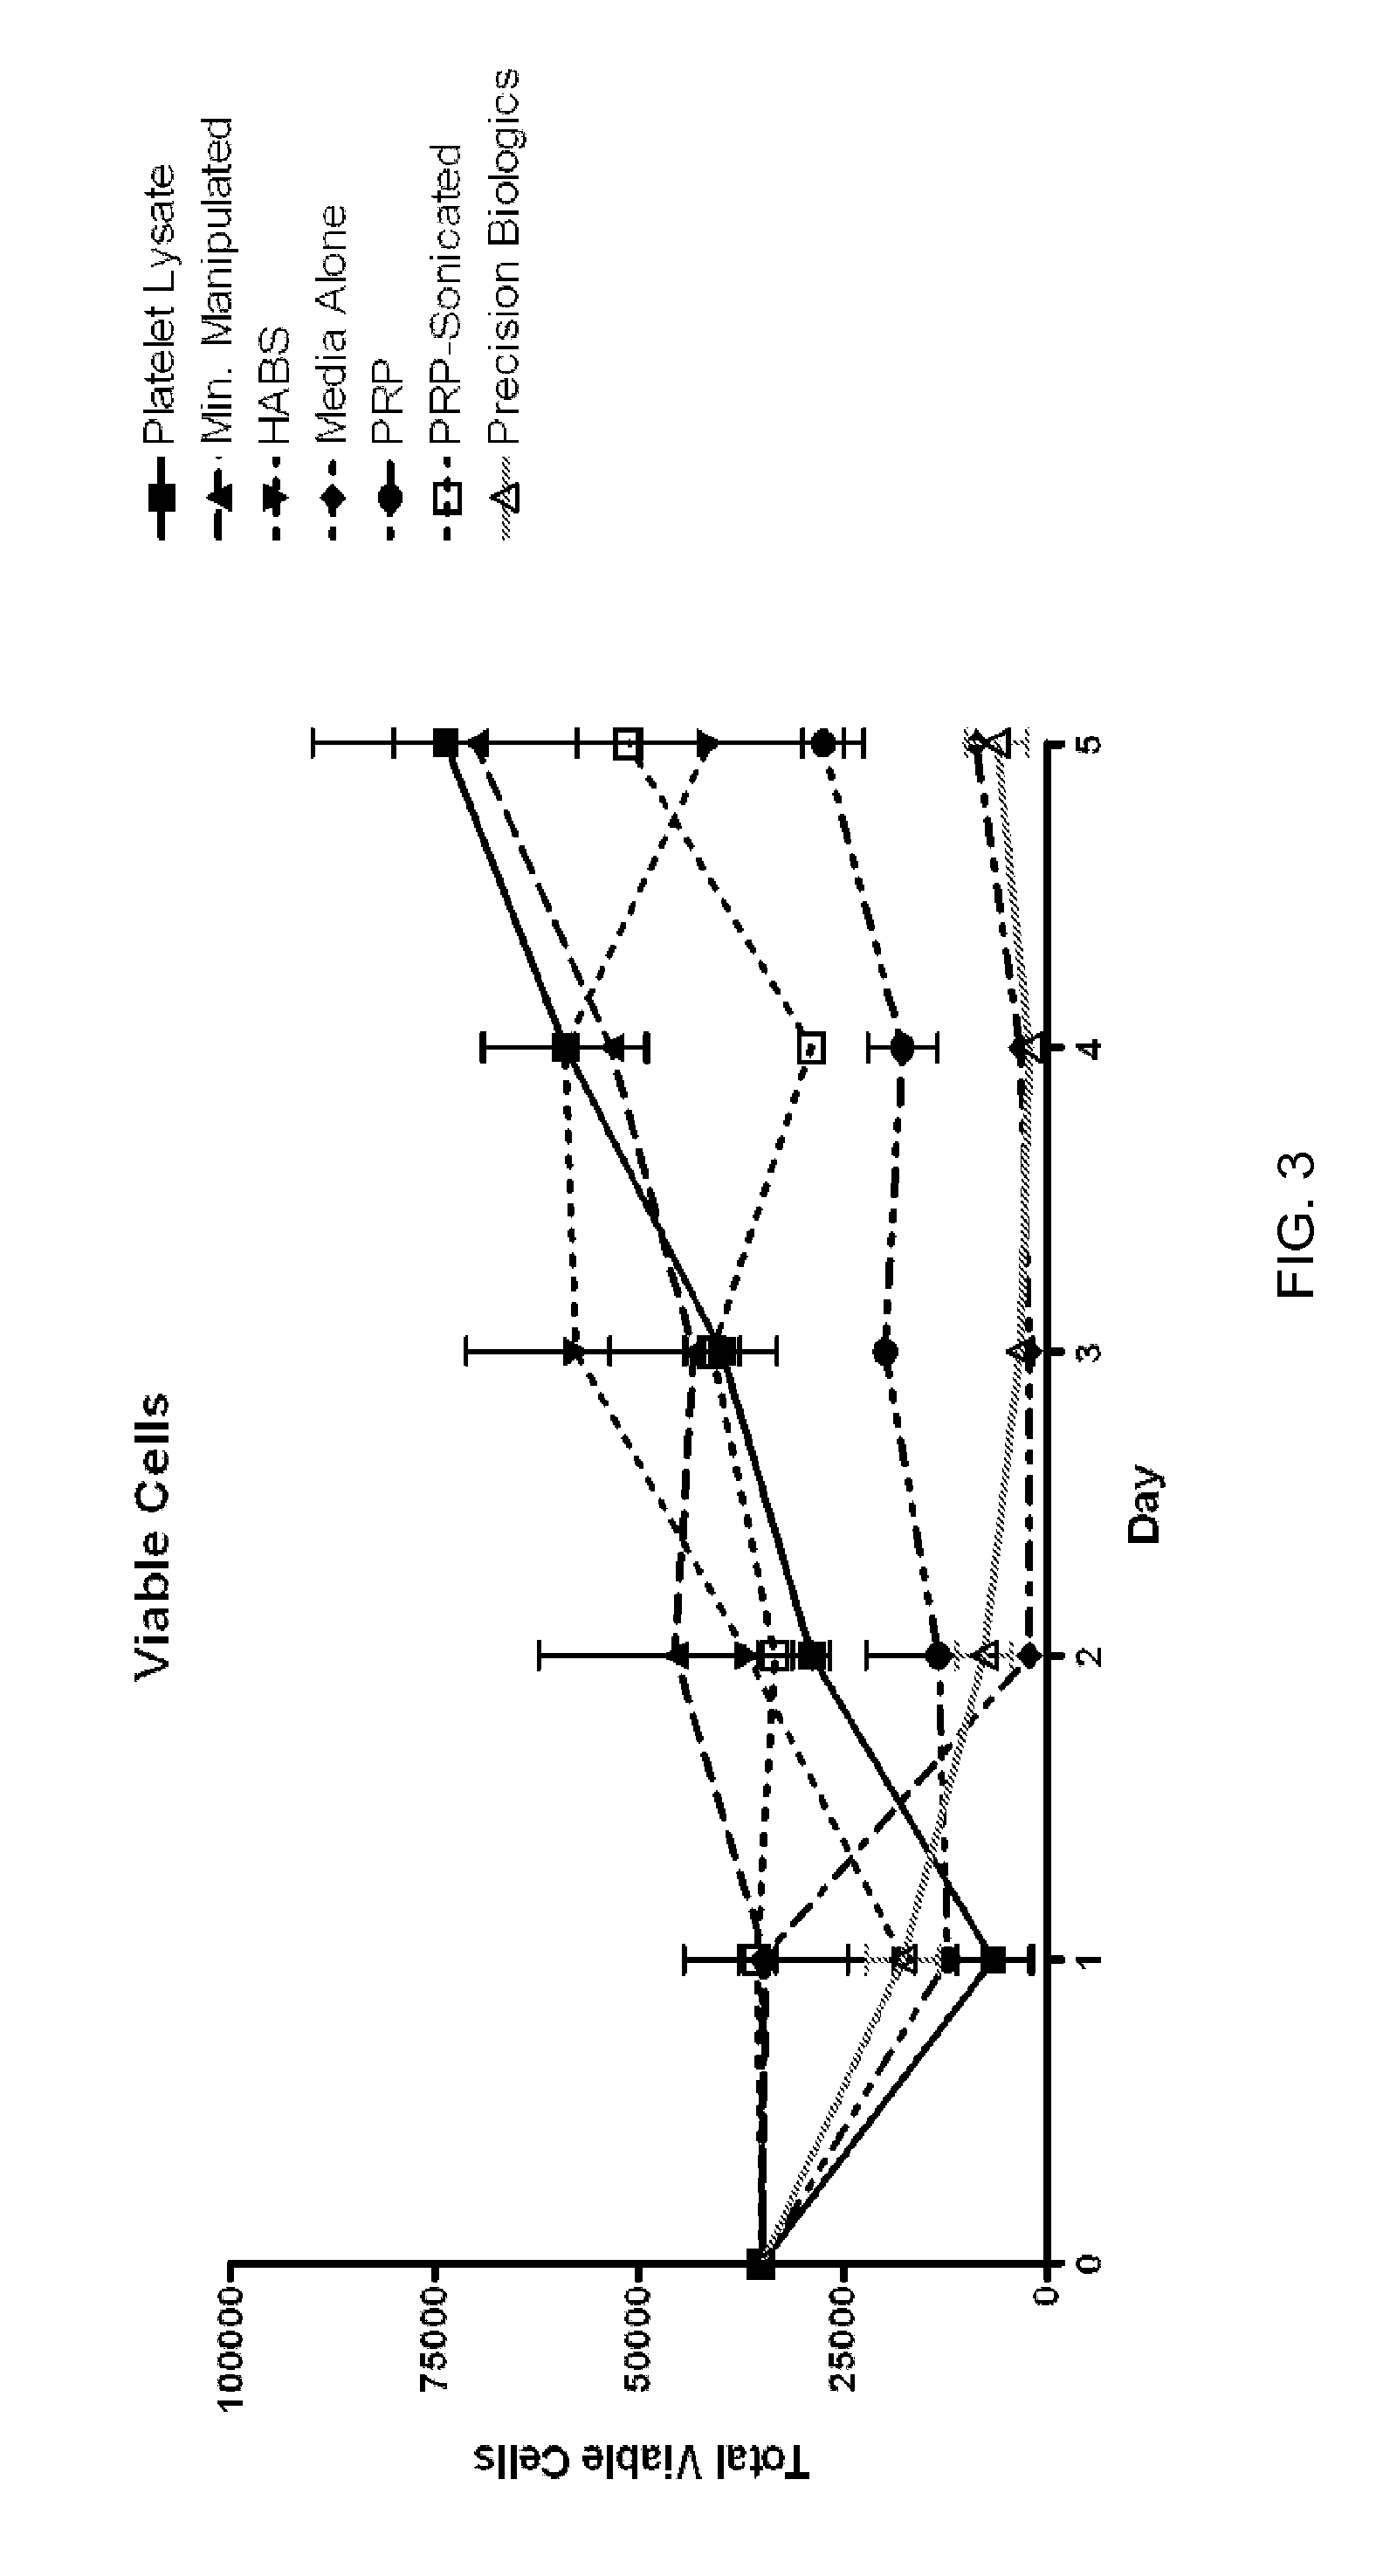 Compositions containing platelet contents